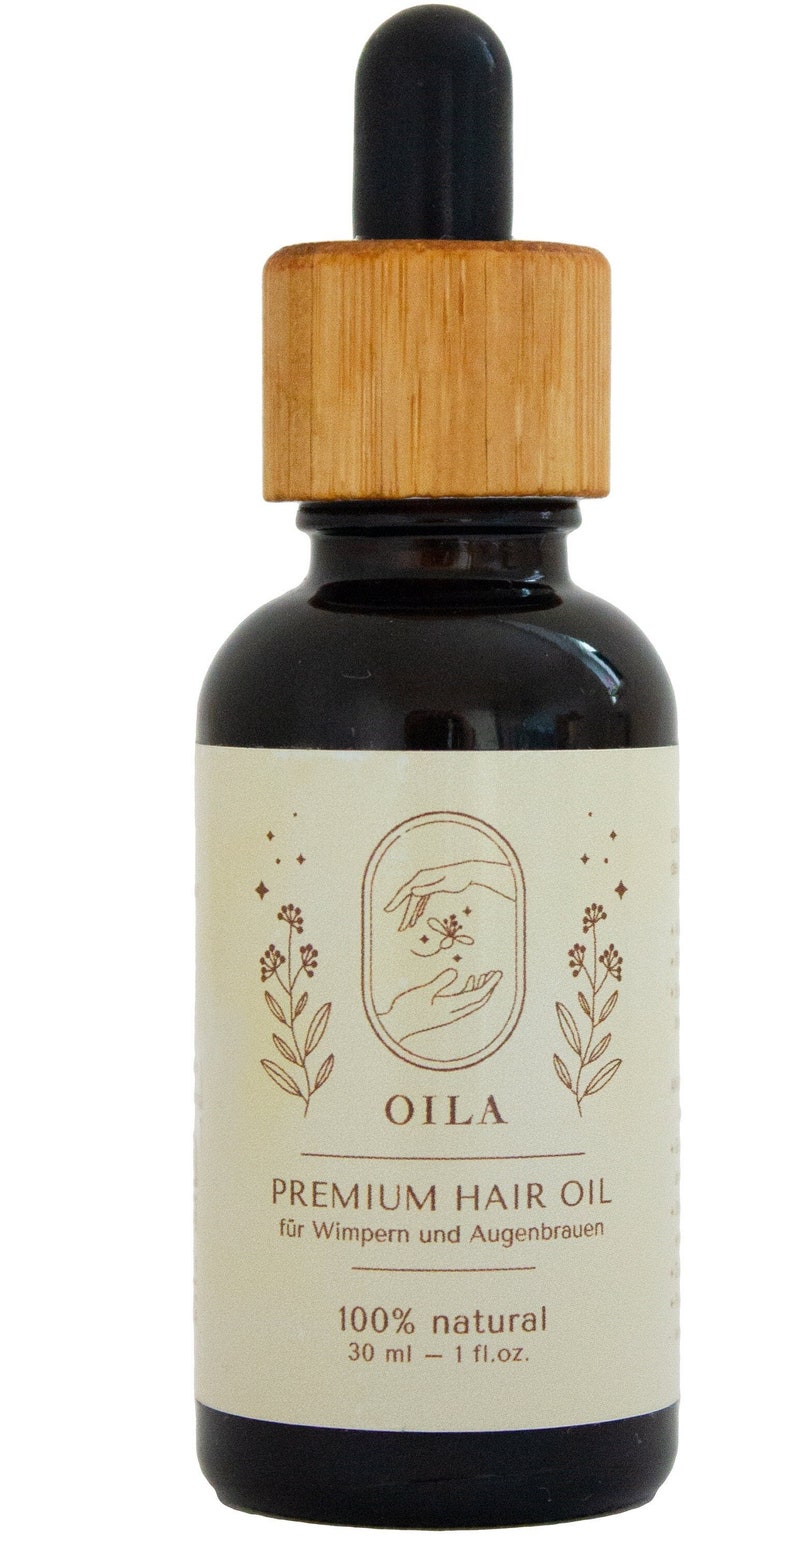 OILA Premium Usma Oil woad: Natural Extract for Voluminous Hair, Thick ...